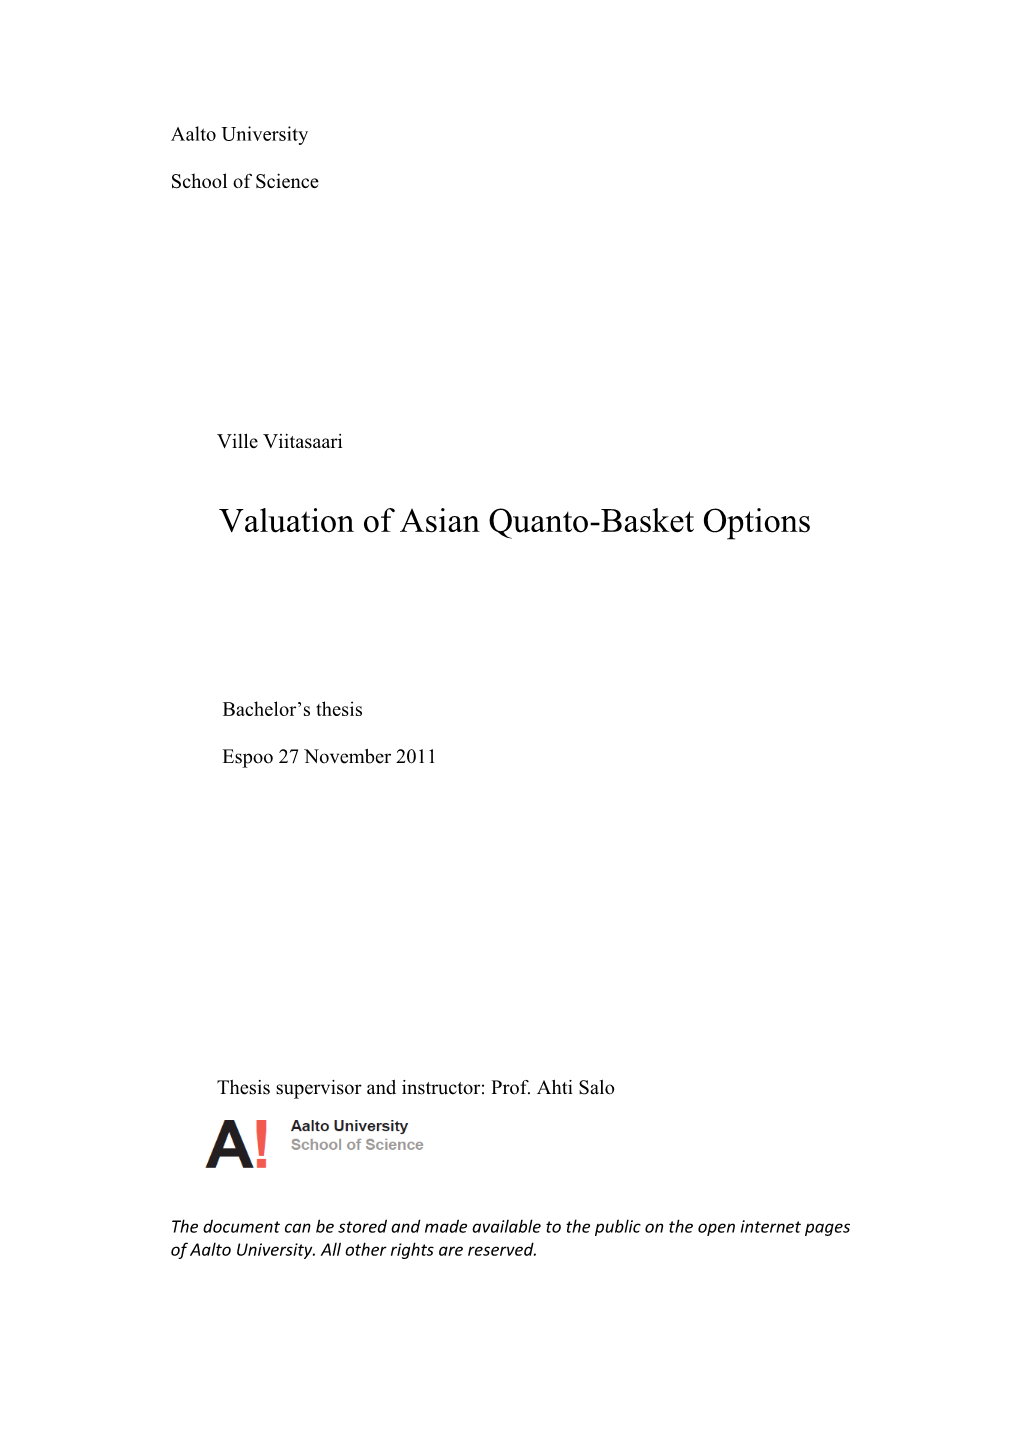 Valuation of Asian Quanto-Basket Options